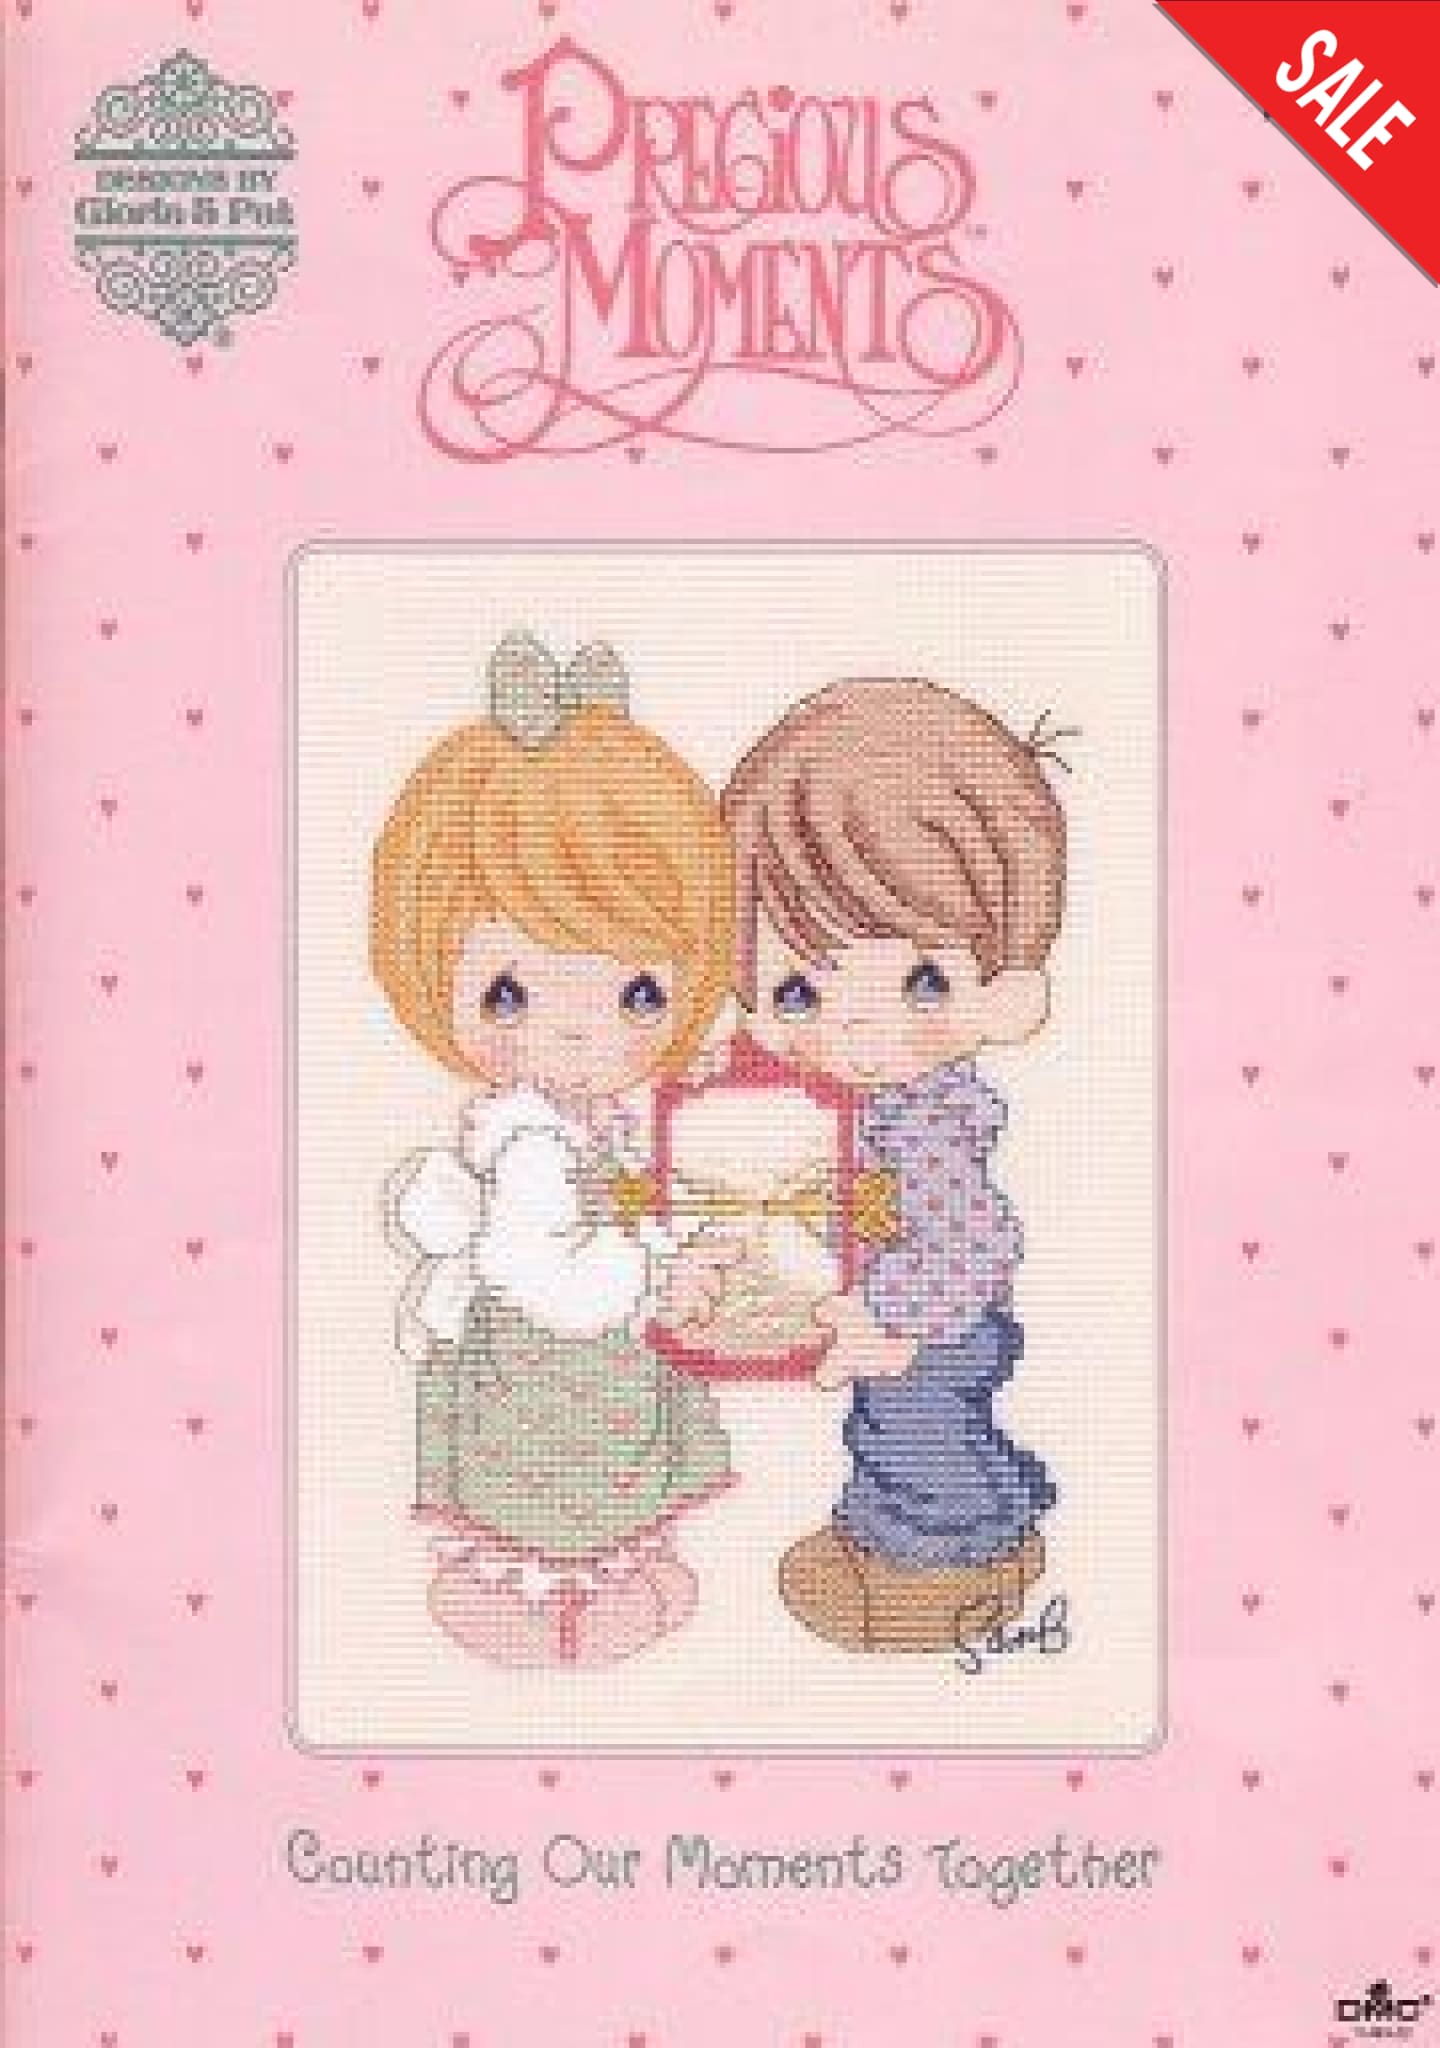 Gloria & Pat Precious Moments 15th Anniversary pattern  Counting Our Moments Together PM1R cross stitch pattern